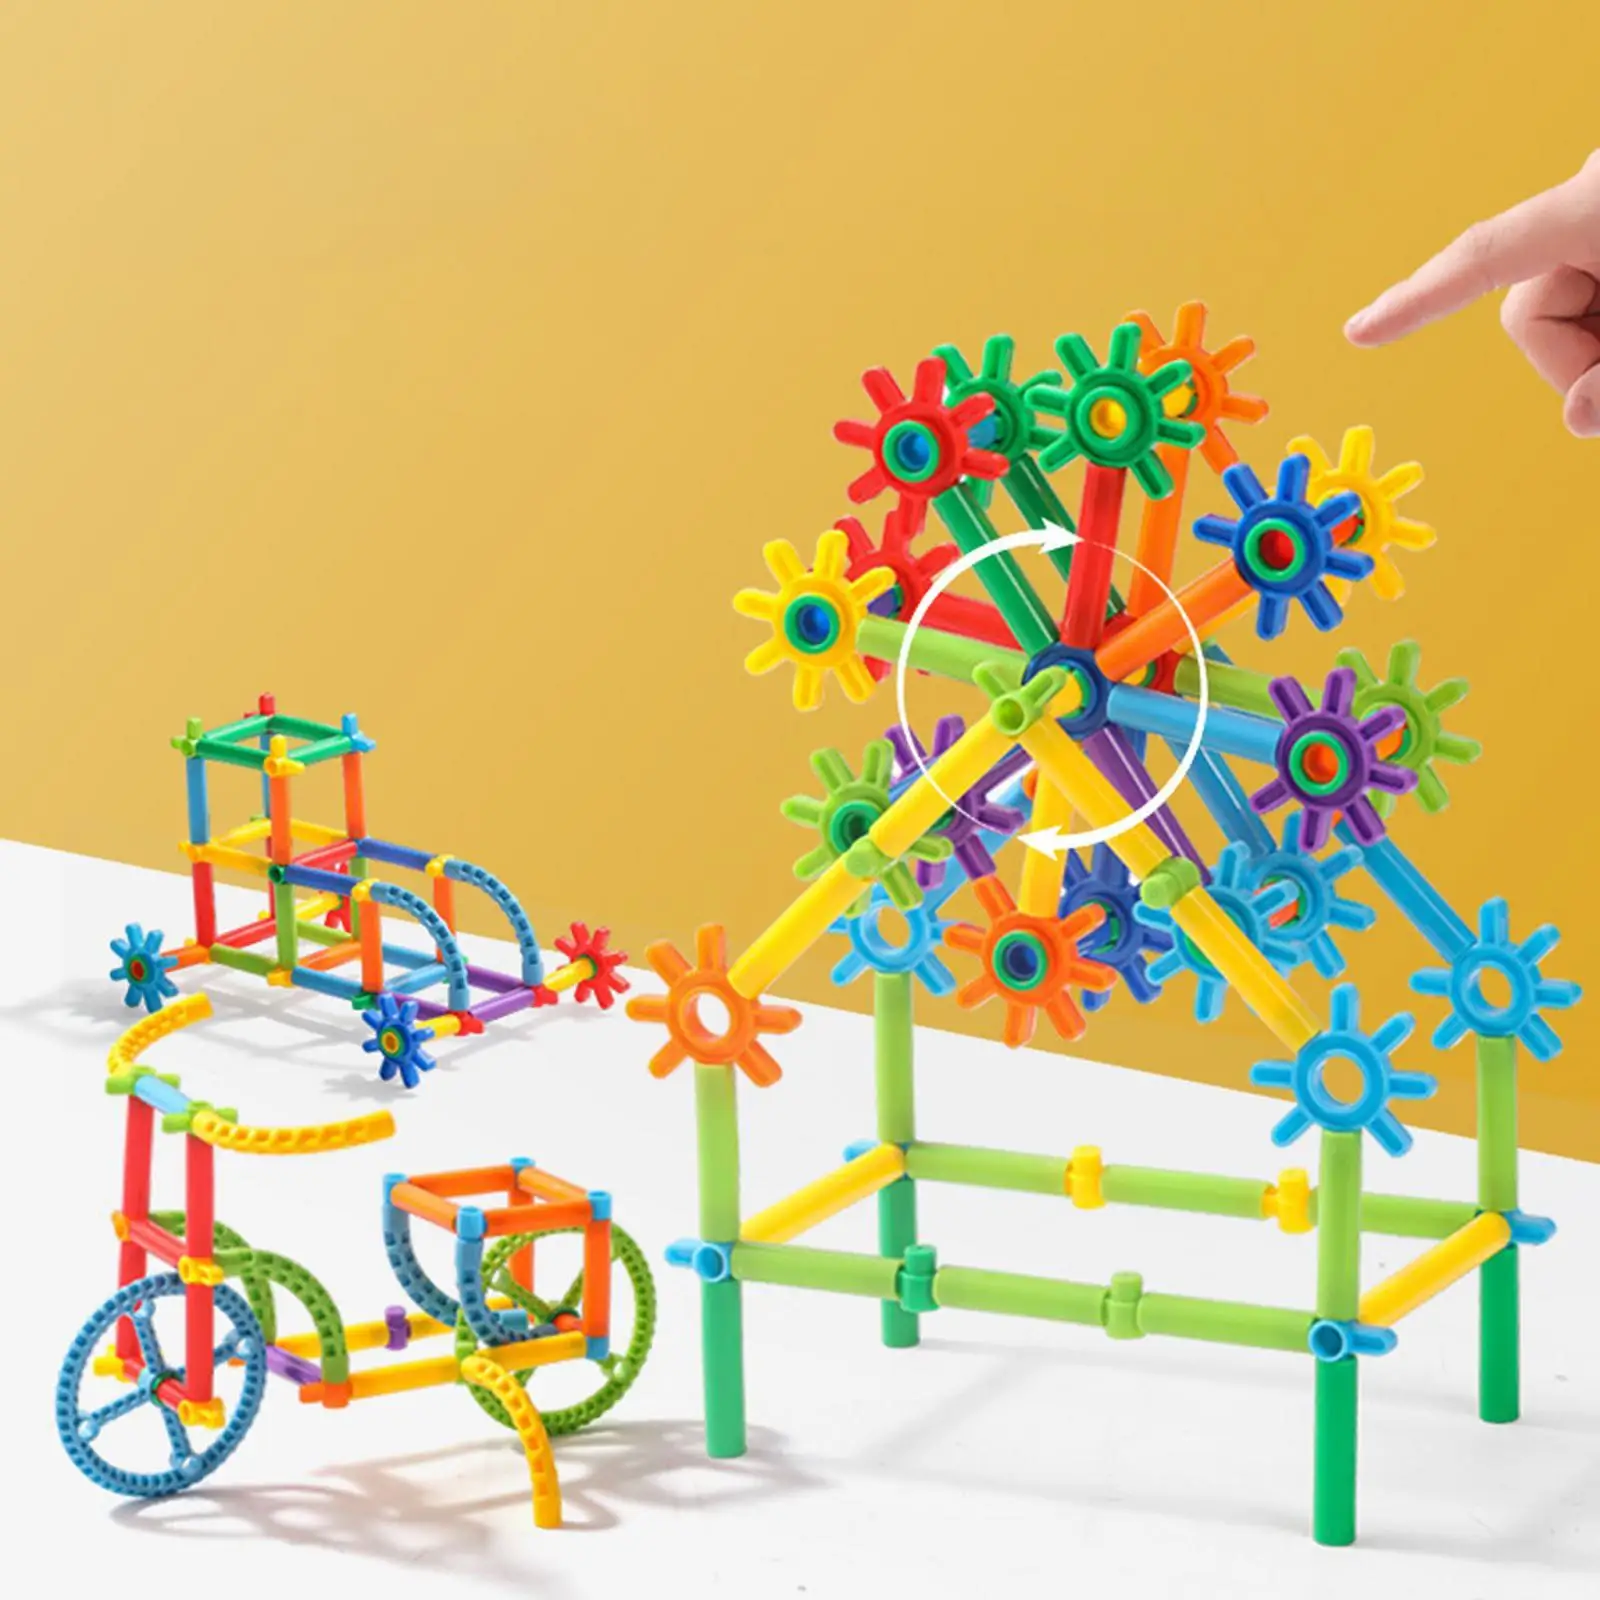 Kids Connecting Tubes Building Activities Creativity Stem Construction Building Toys for Boys and Girls Preschool Birthday Gift